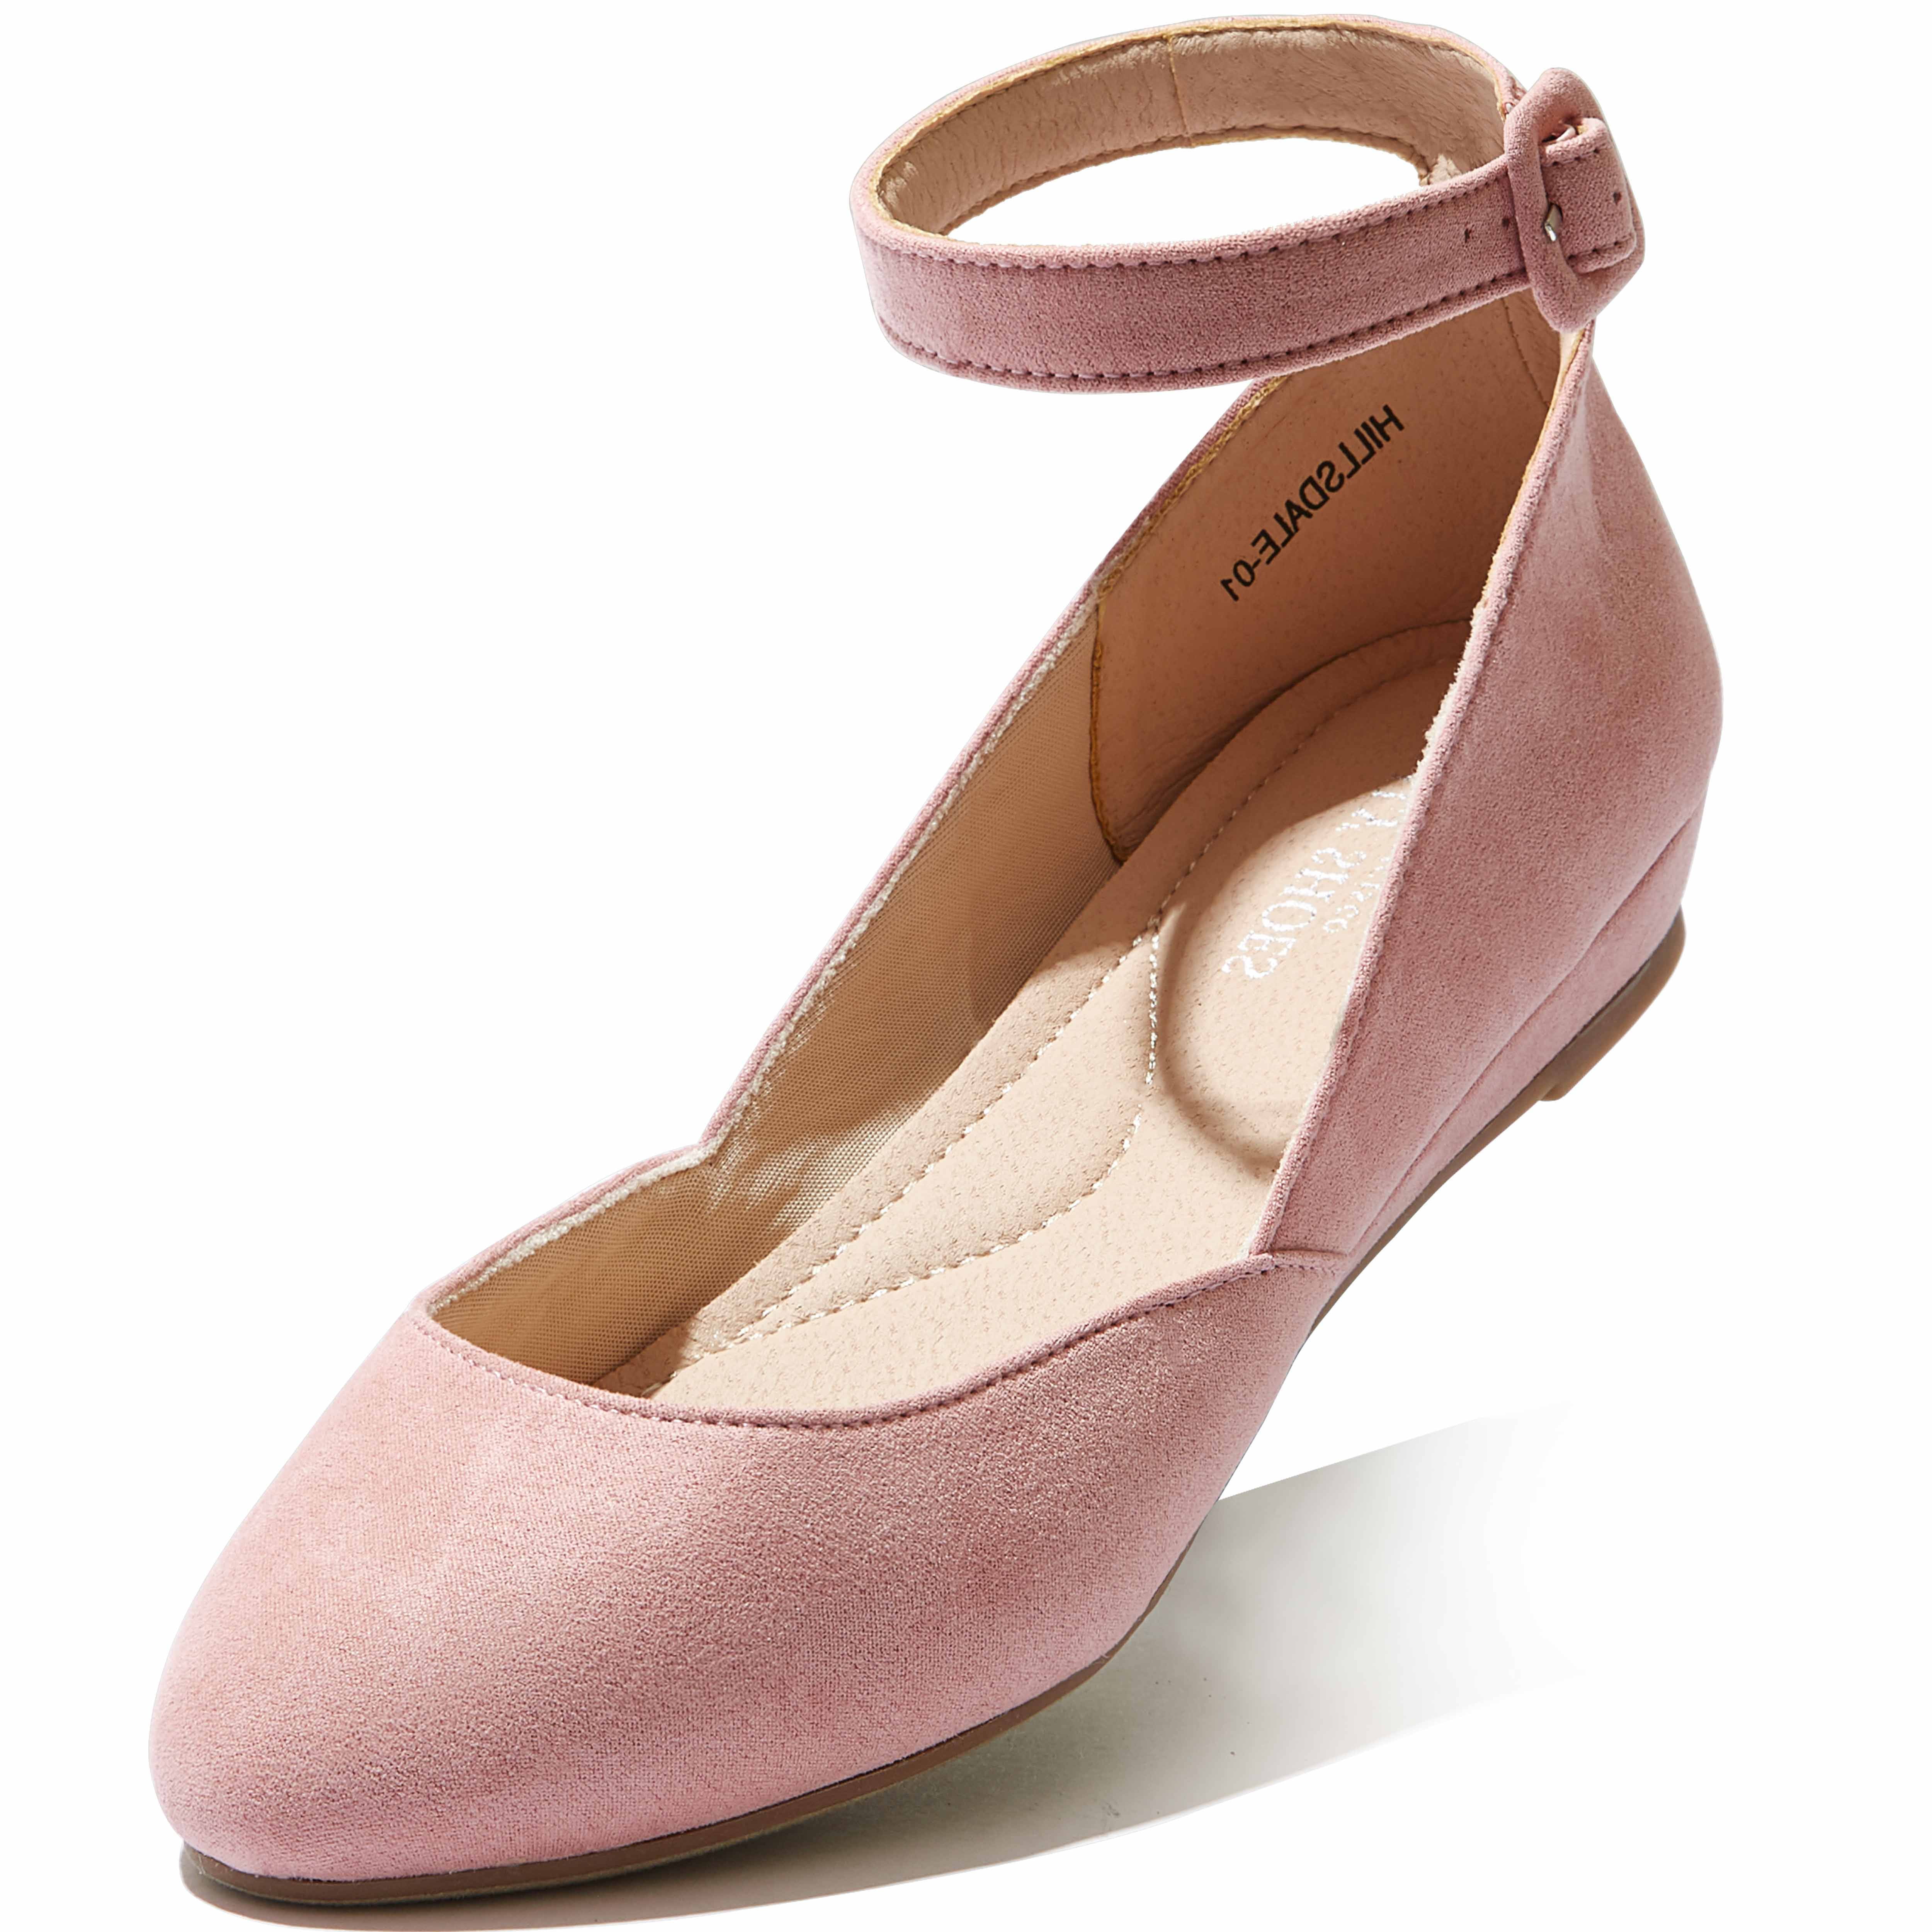 Kids Ballet Flats Ankle Strap Buckle Accent Girls Suede Casual Shoes Taupe